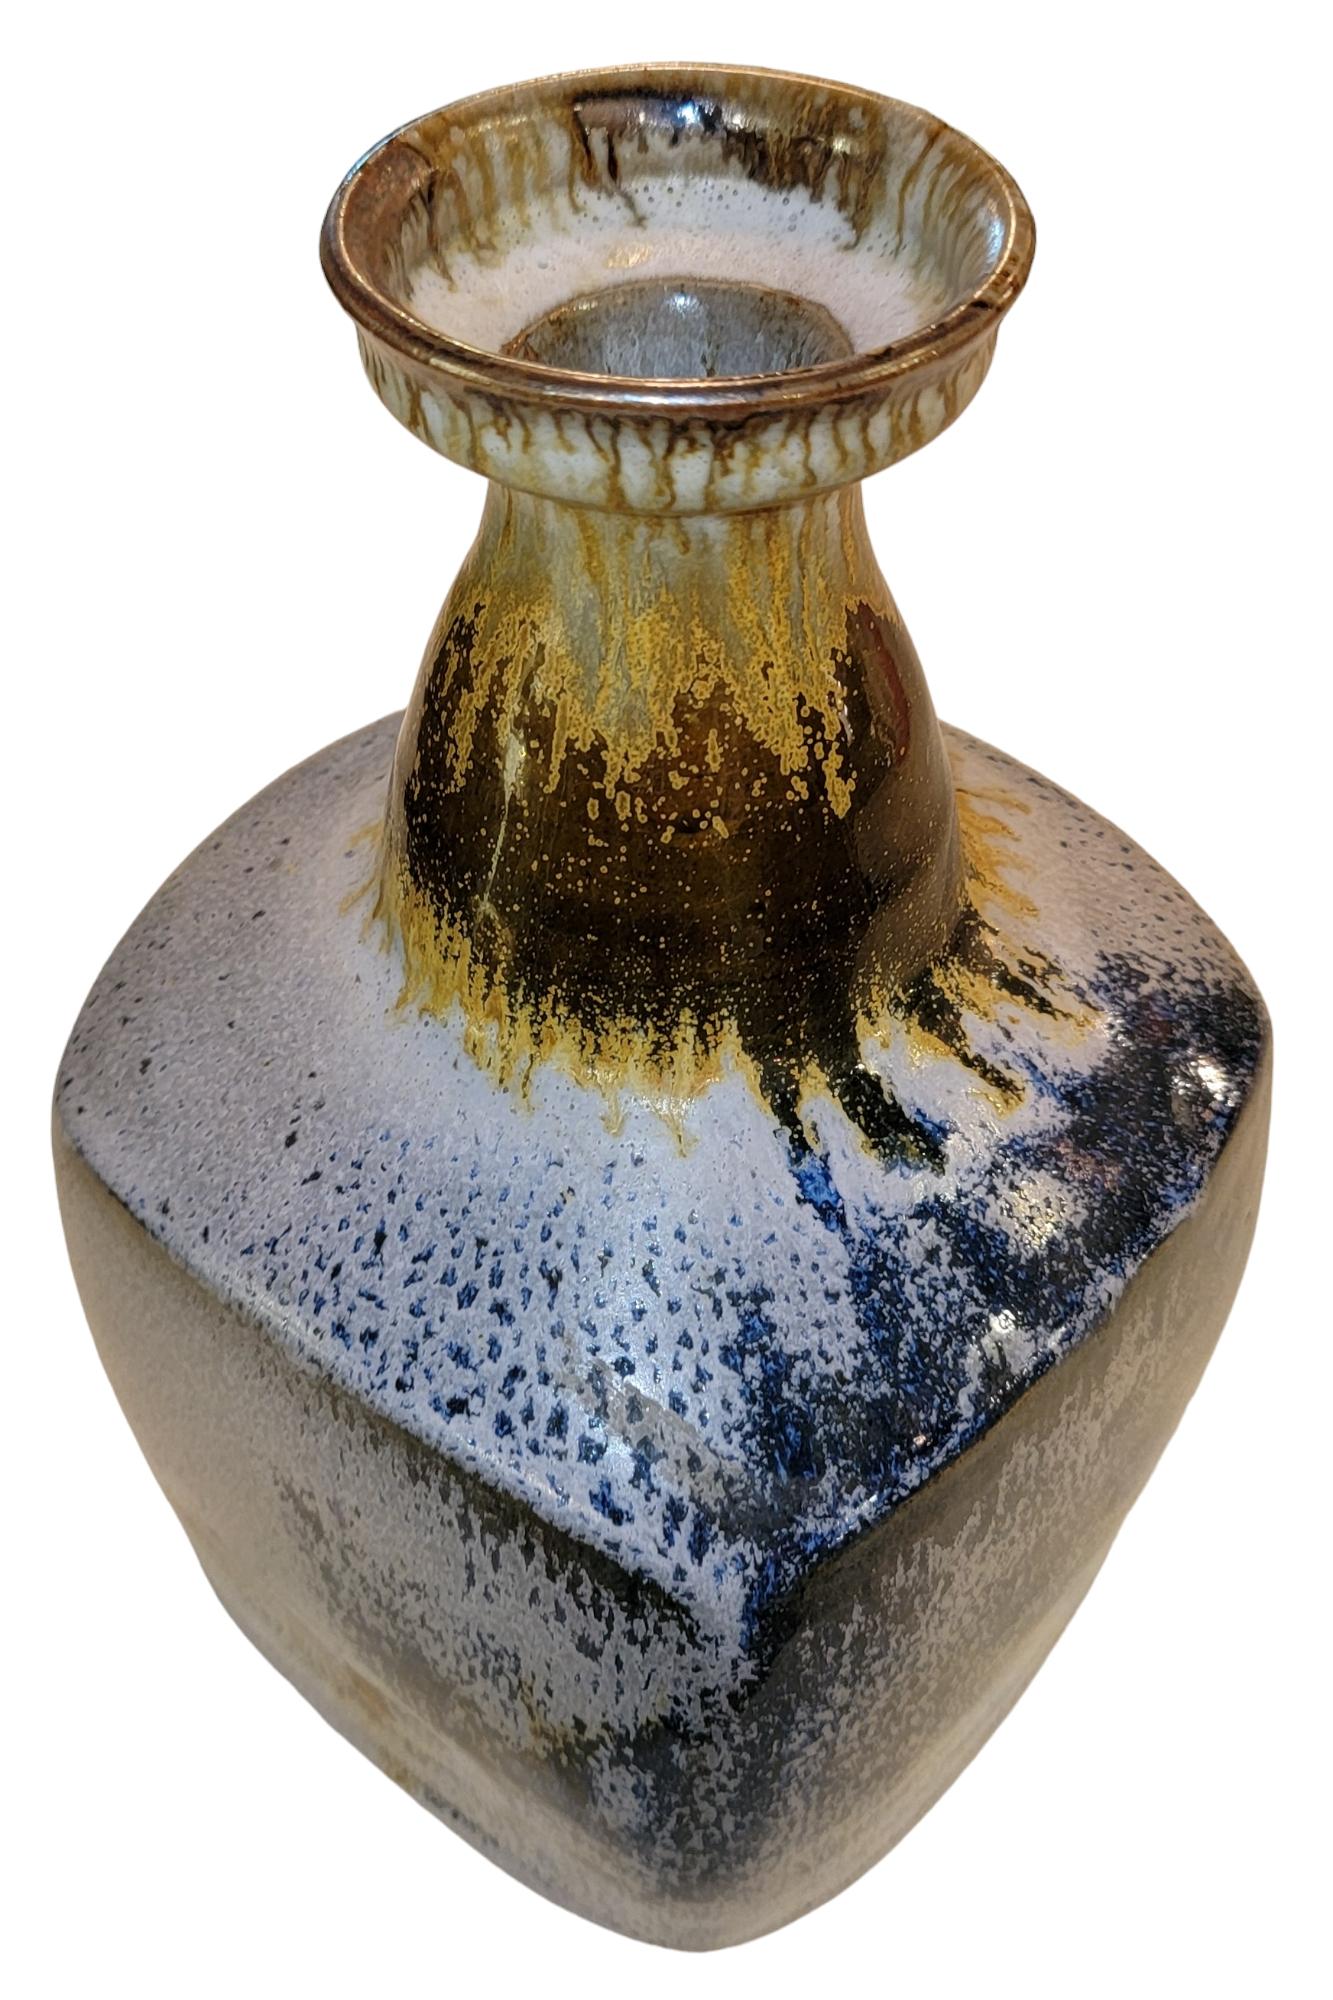 Pottery Vase With Drip Paint. Wonderful texture that is accentuated by the precise paint. There are many different tones flow thought the exterior leading the seer downward or upward at a glance.
Measures approx - 6.5w x 6.5d x 11.5h